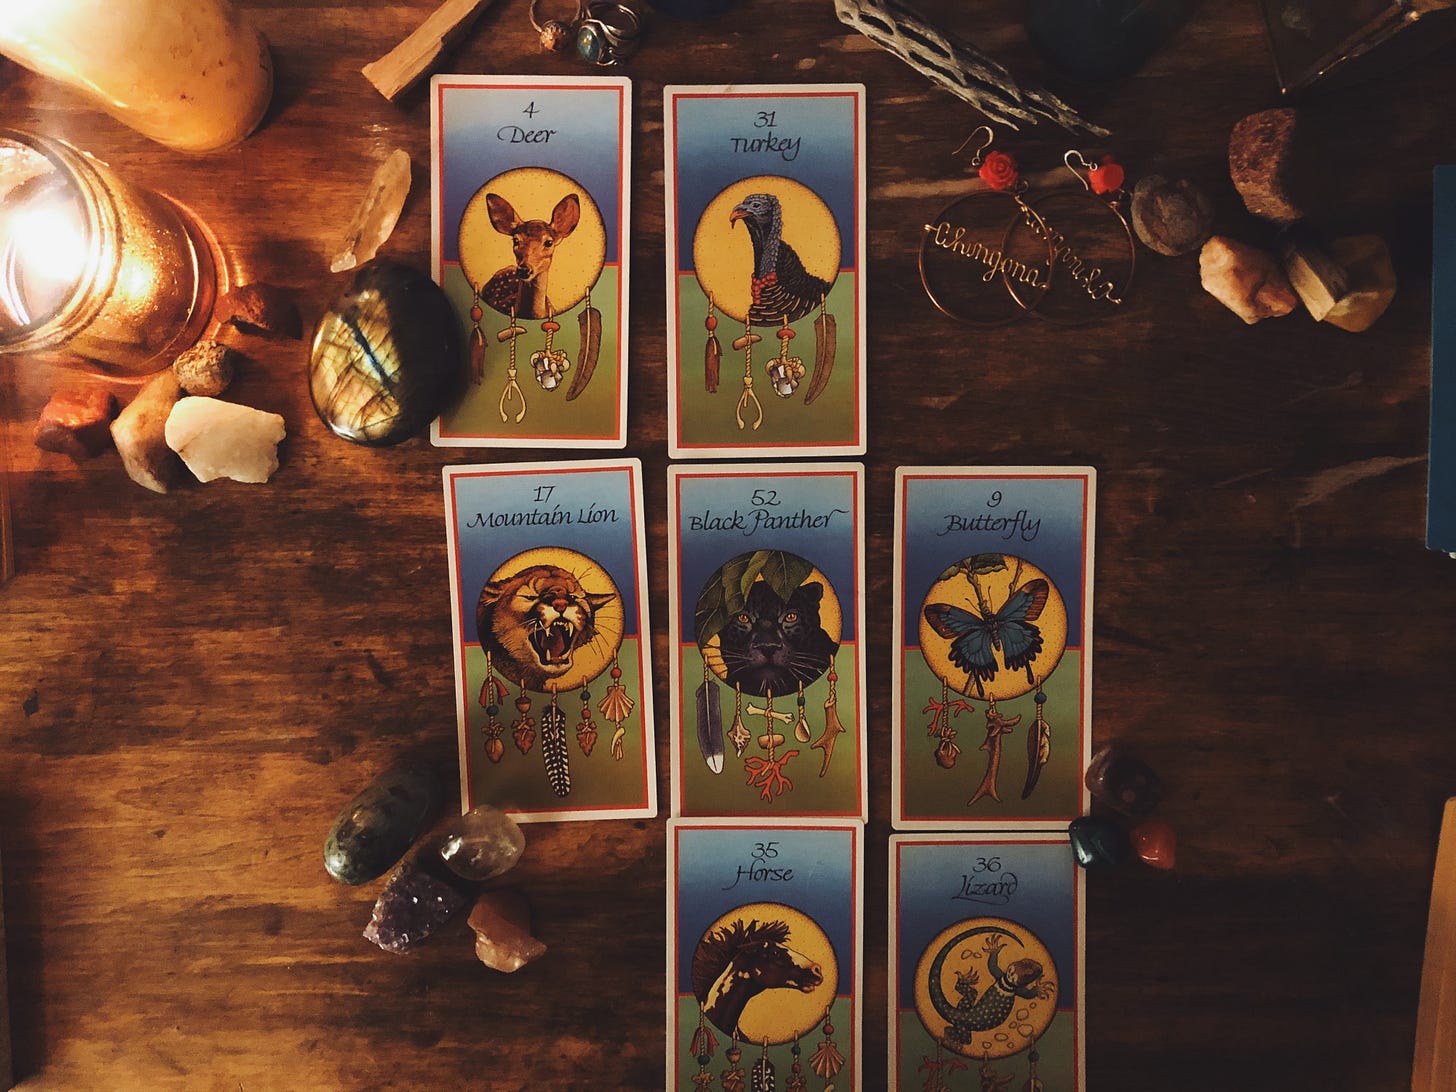 7 animal medicine oracle cards are set up in a Pathway spread, surrounded by candles and stones. From top left, the cards read: Deer, Turkey, Mountain Lion, Black Panther, Butterfly, Horse, and Lizard.